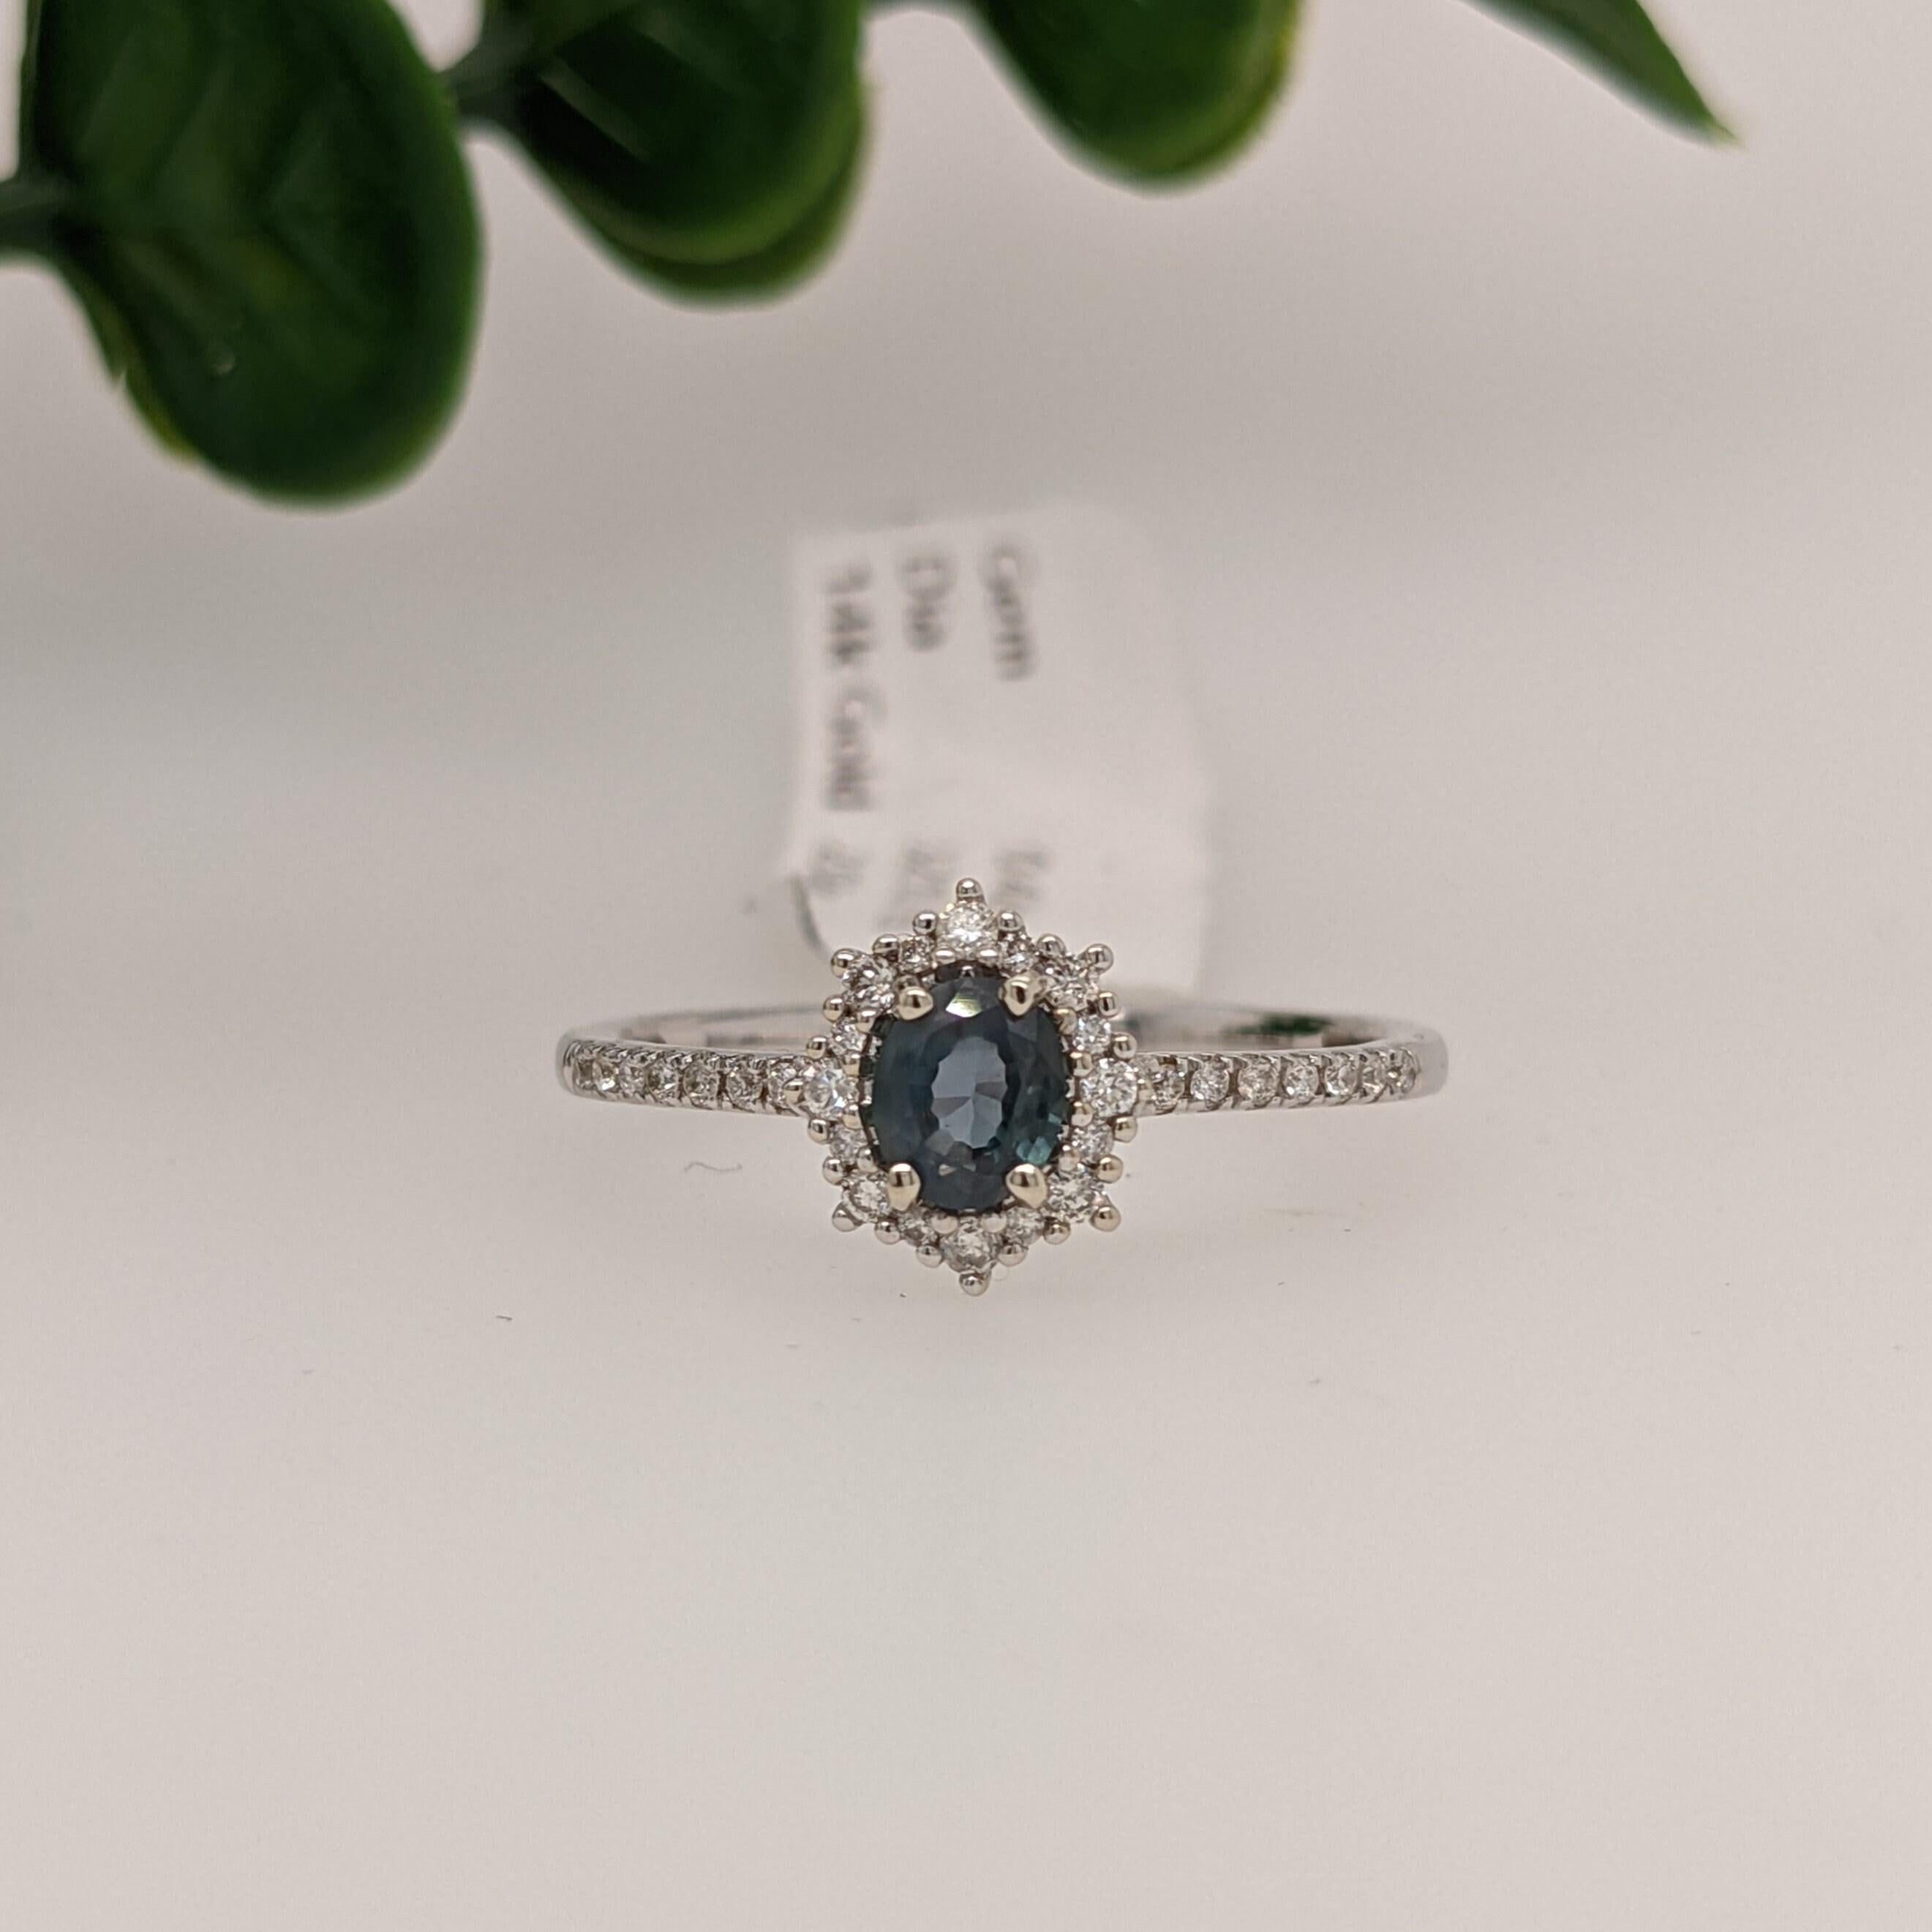 This beautiful ring features a unique natural color changing Alexandrite with natural earth-mined diamond accents in solid 14k white Gold. The color changing natural Alexandrite appears green/blue in daylight and shifts to a deep purple with red